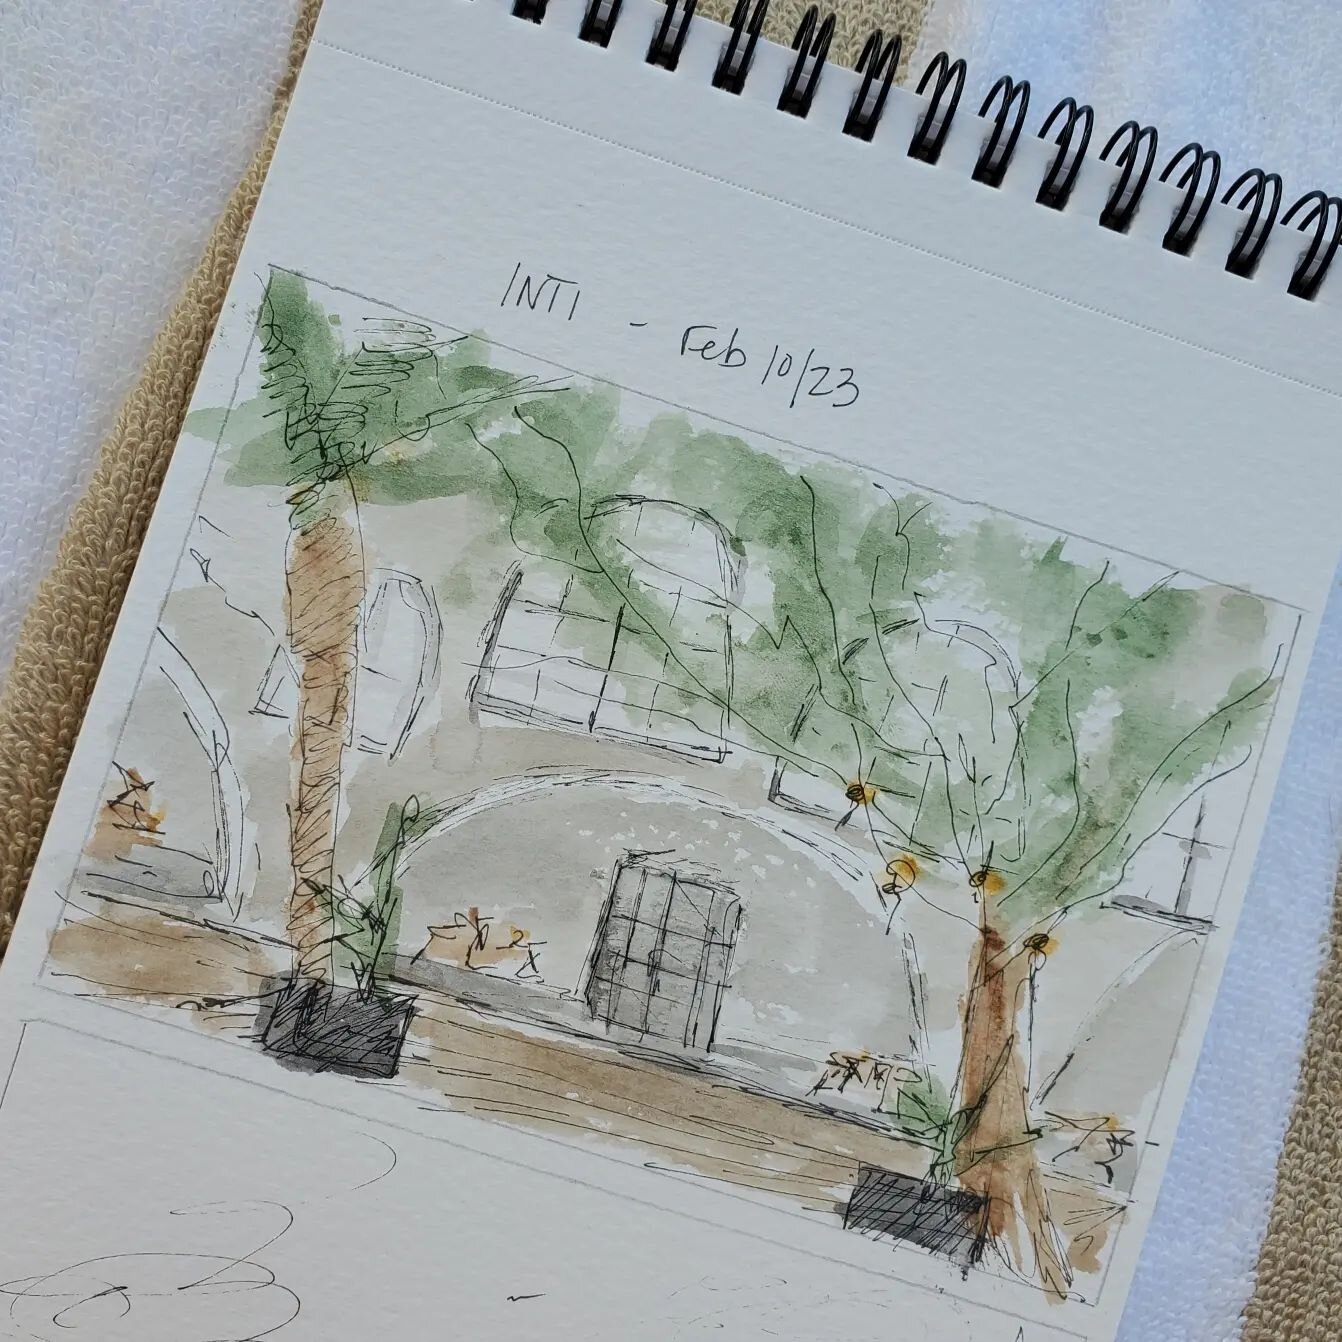 Swipe ➡️ for inspo pic for this little sketch. 

Mexico had the most beautiful restayrants tucked away in the side street with amazing trees, vines and architecture. Still seeing a lot of it coming through in my current work.